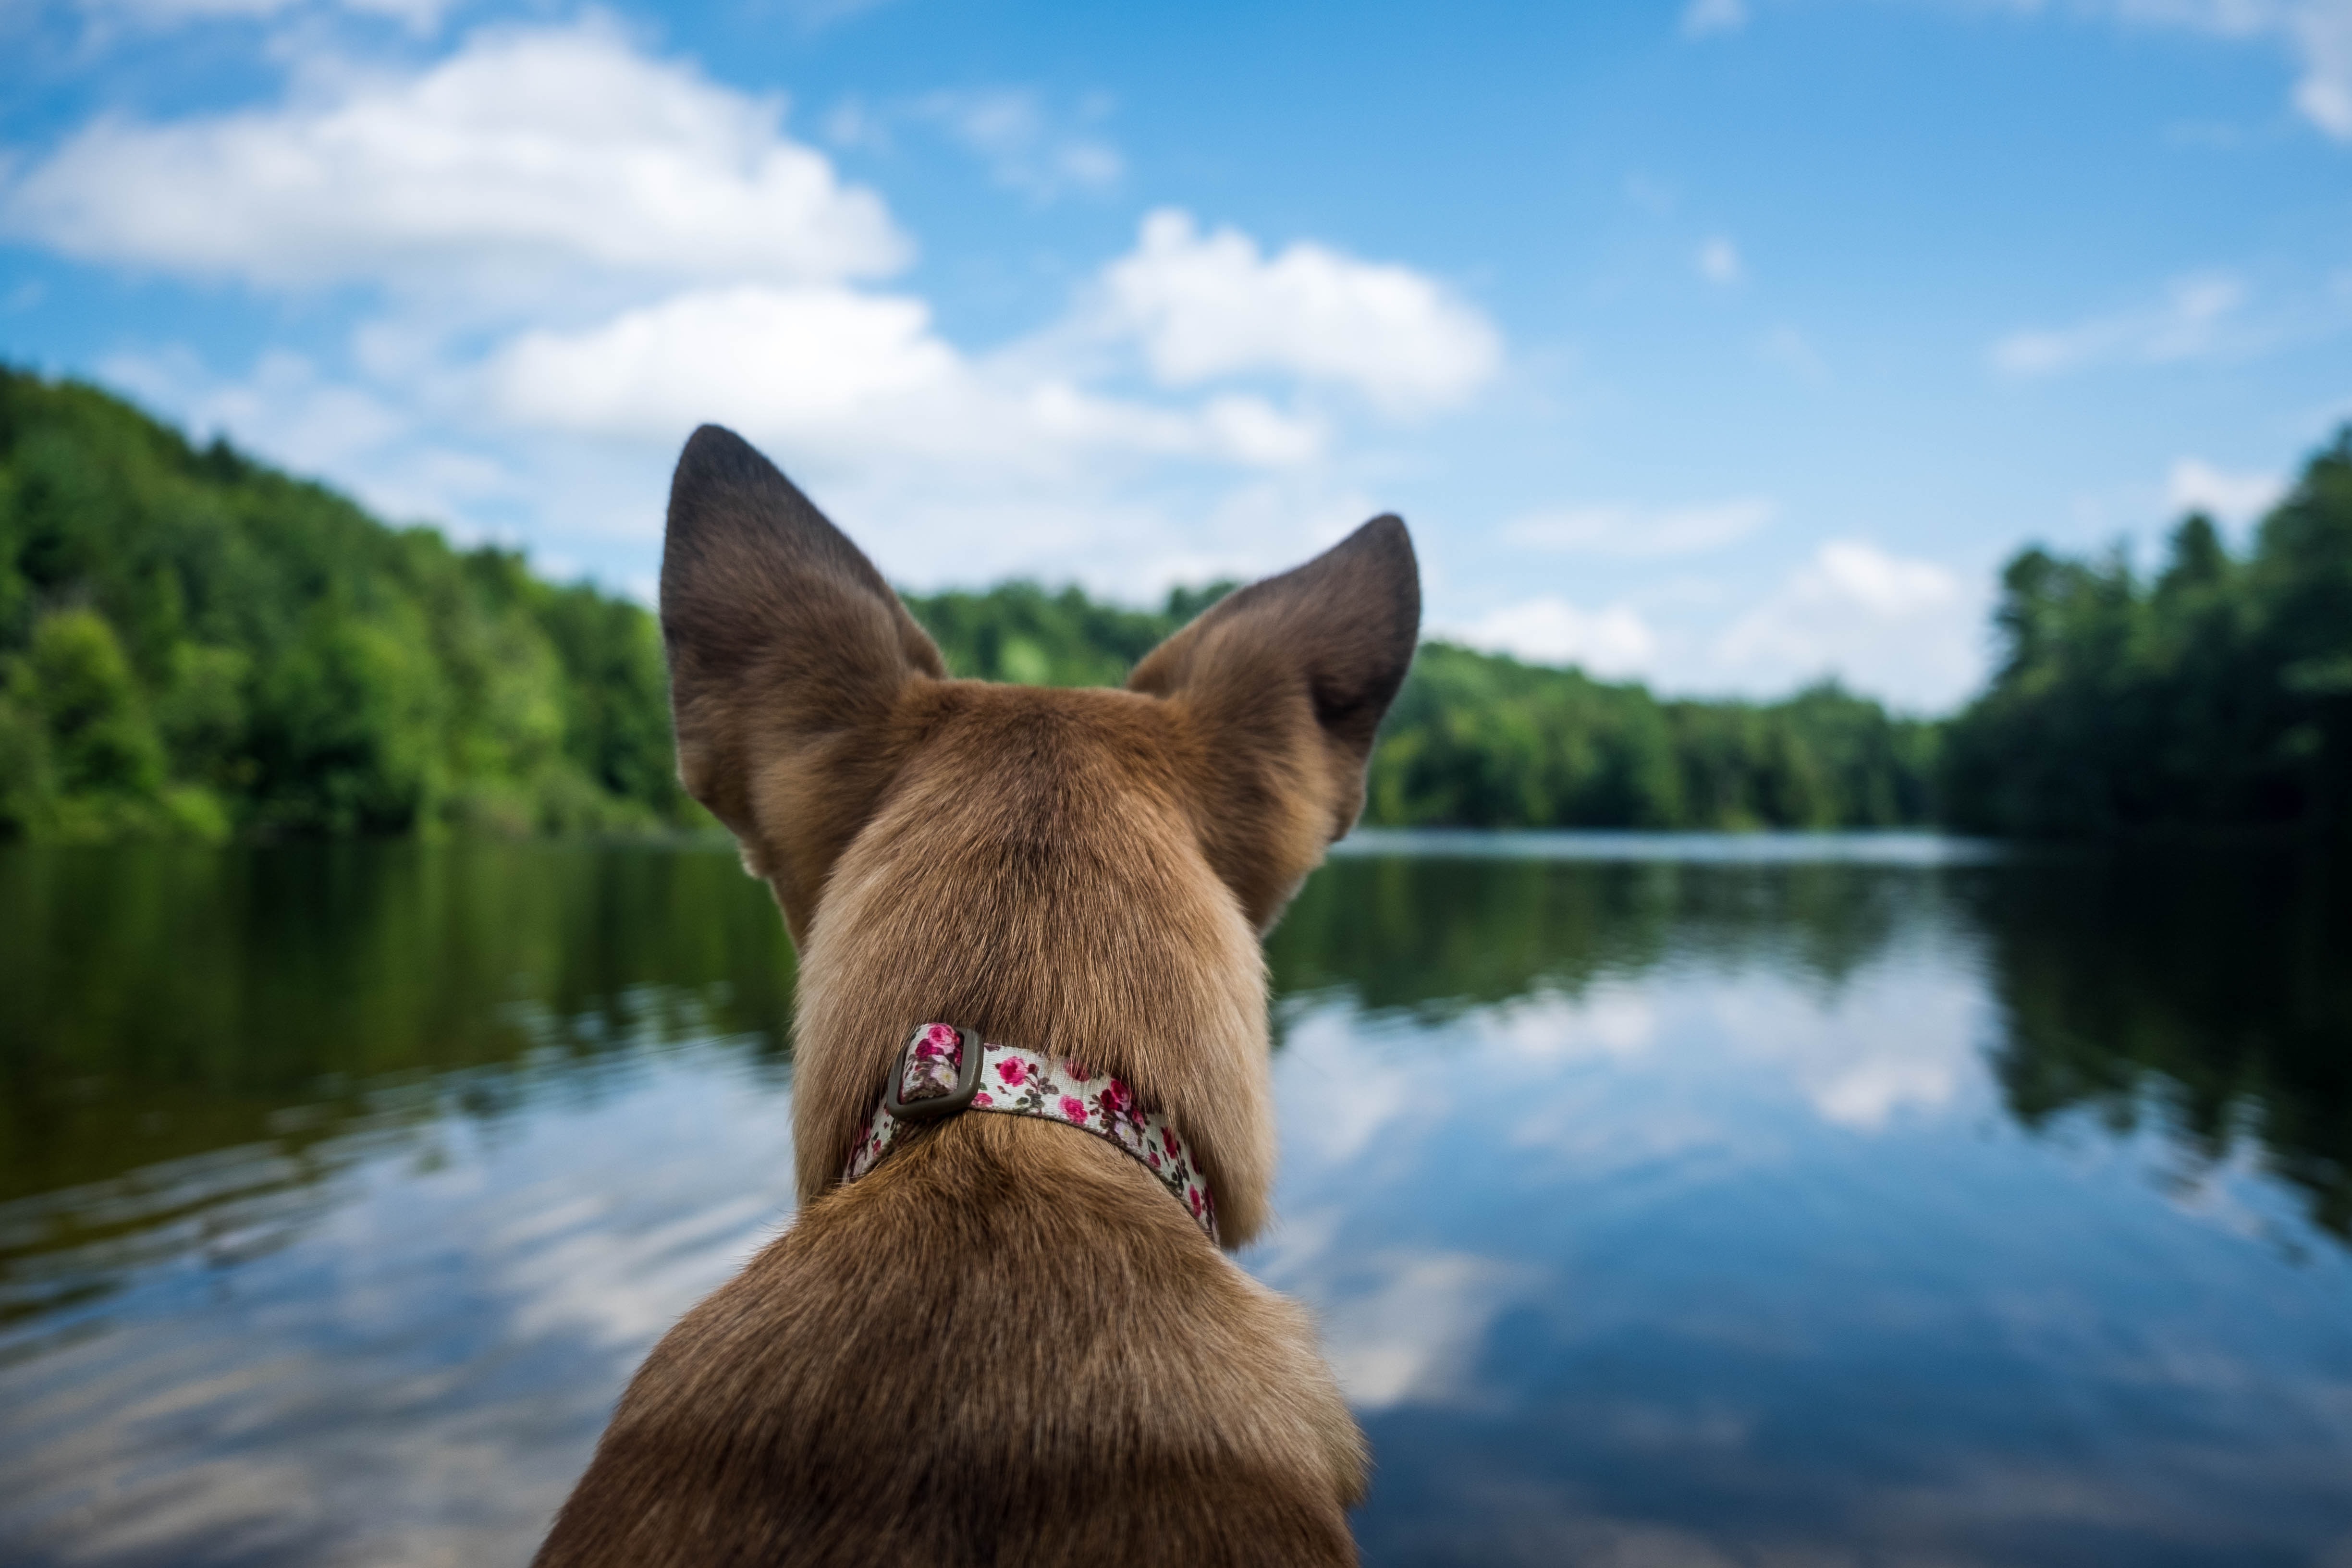 Image of a dog at the water